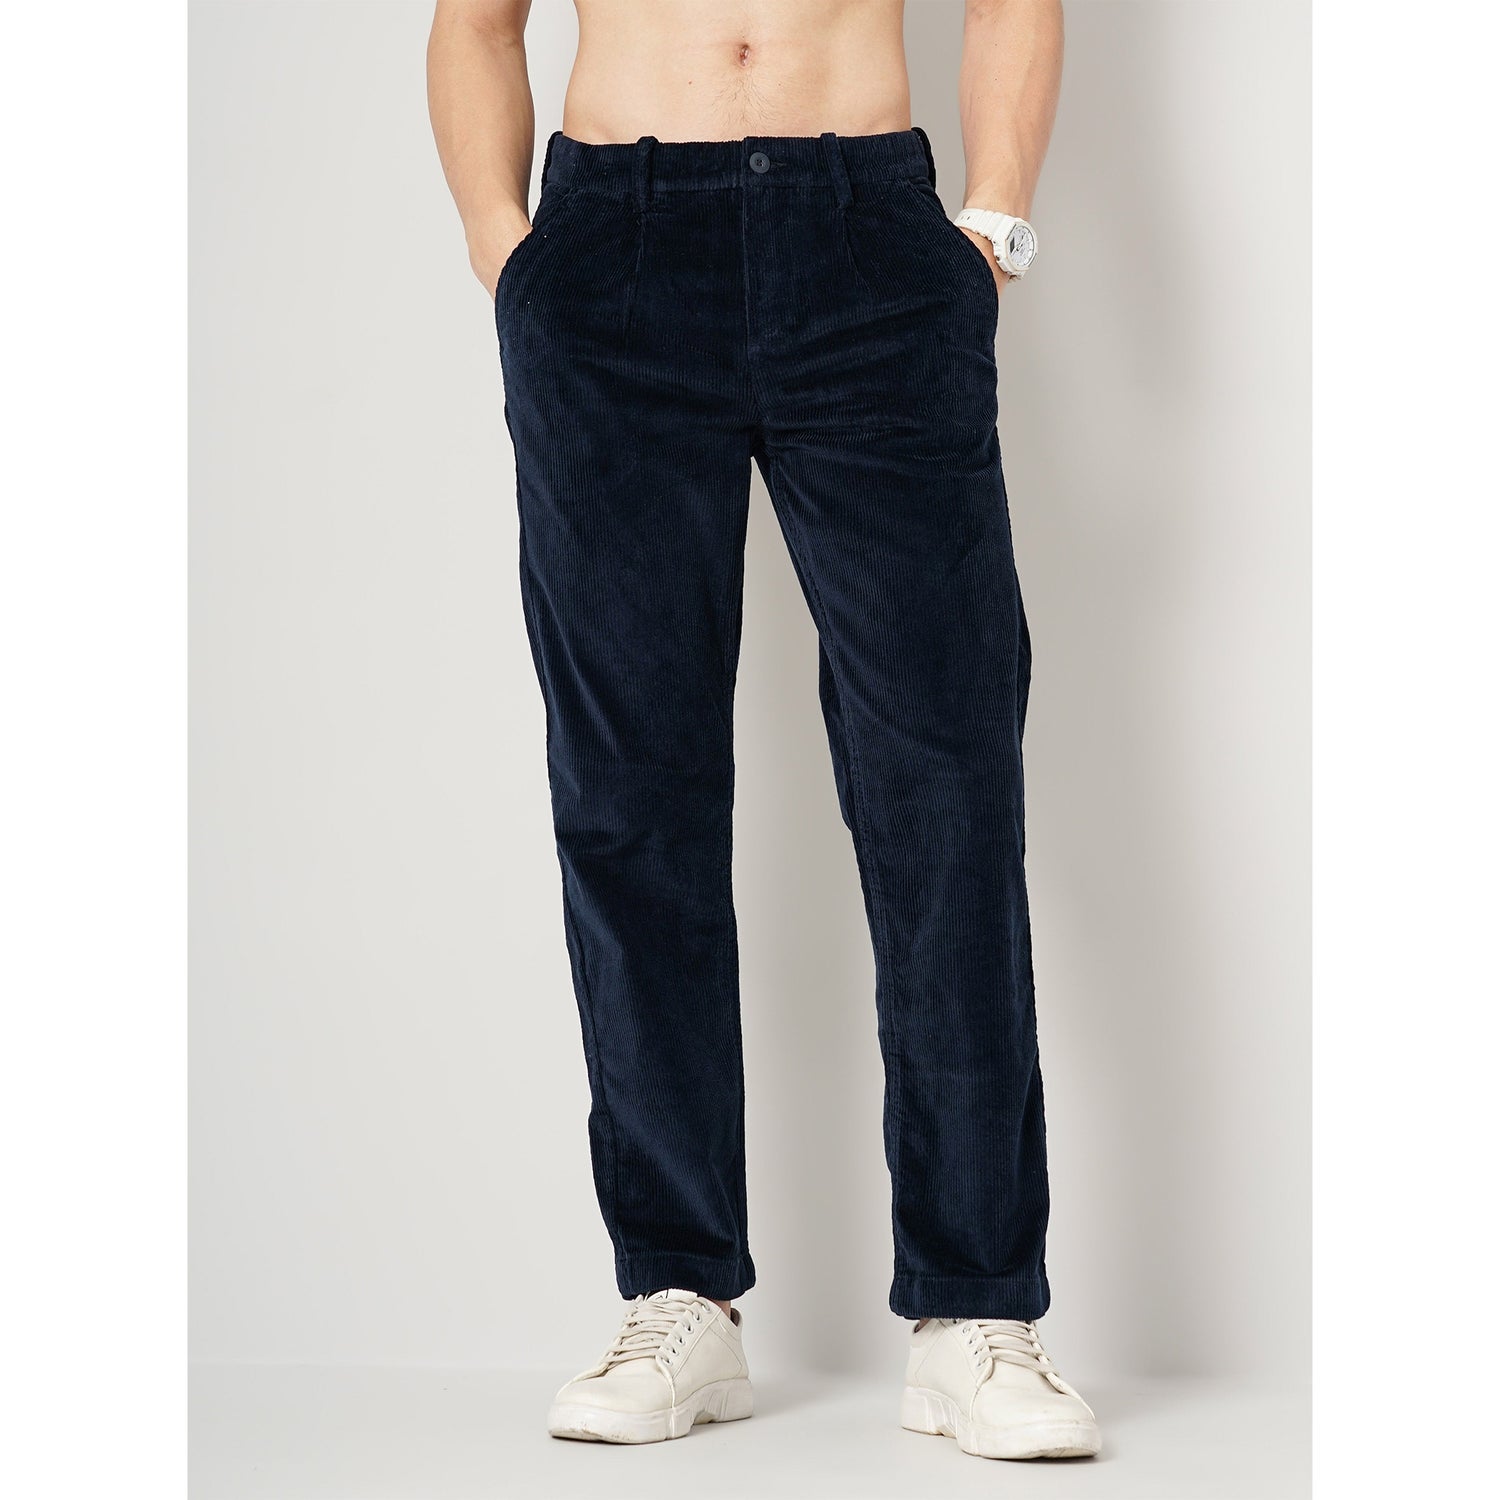 Navy Solid Cotton Trousers